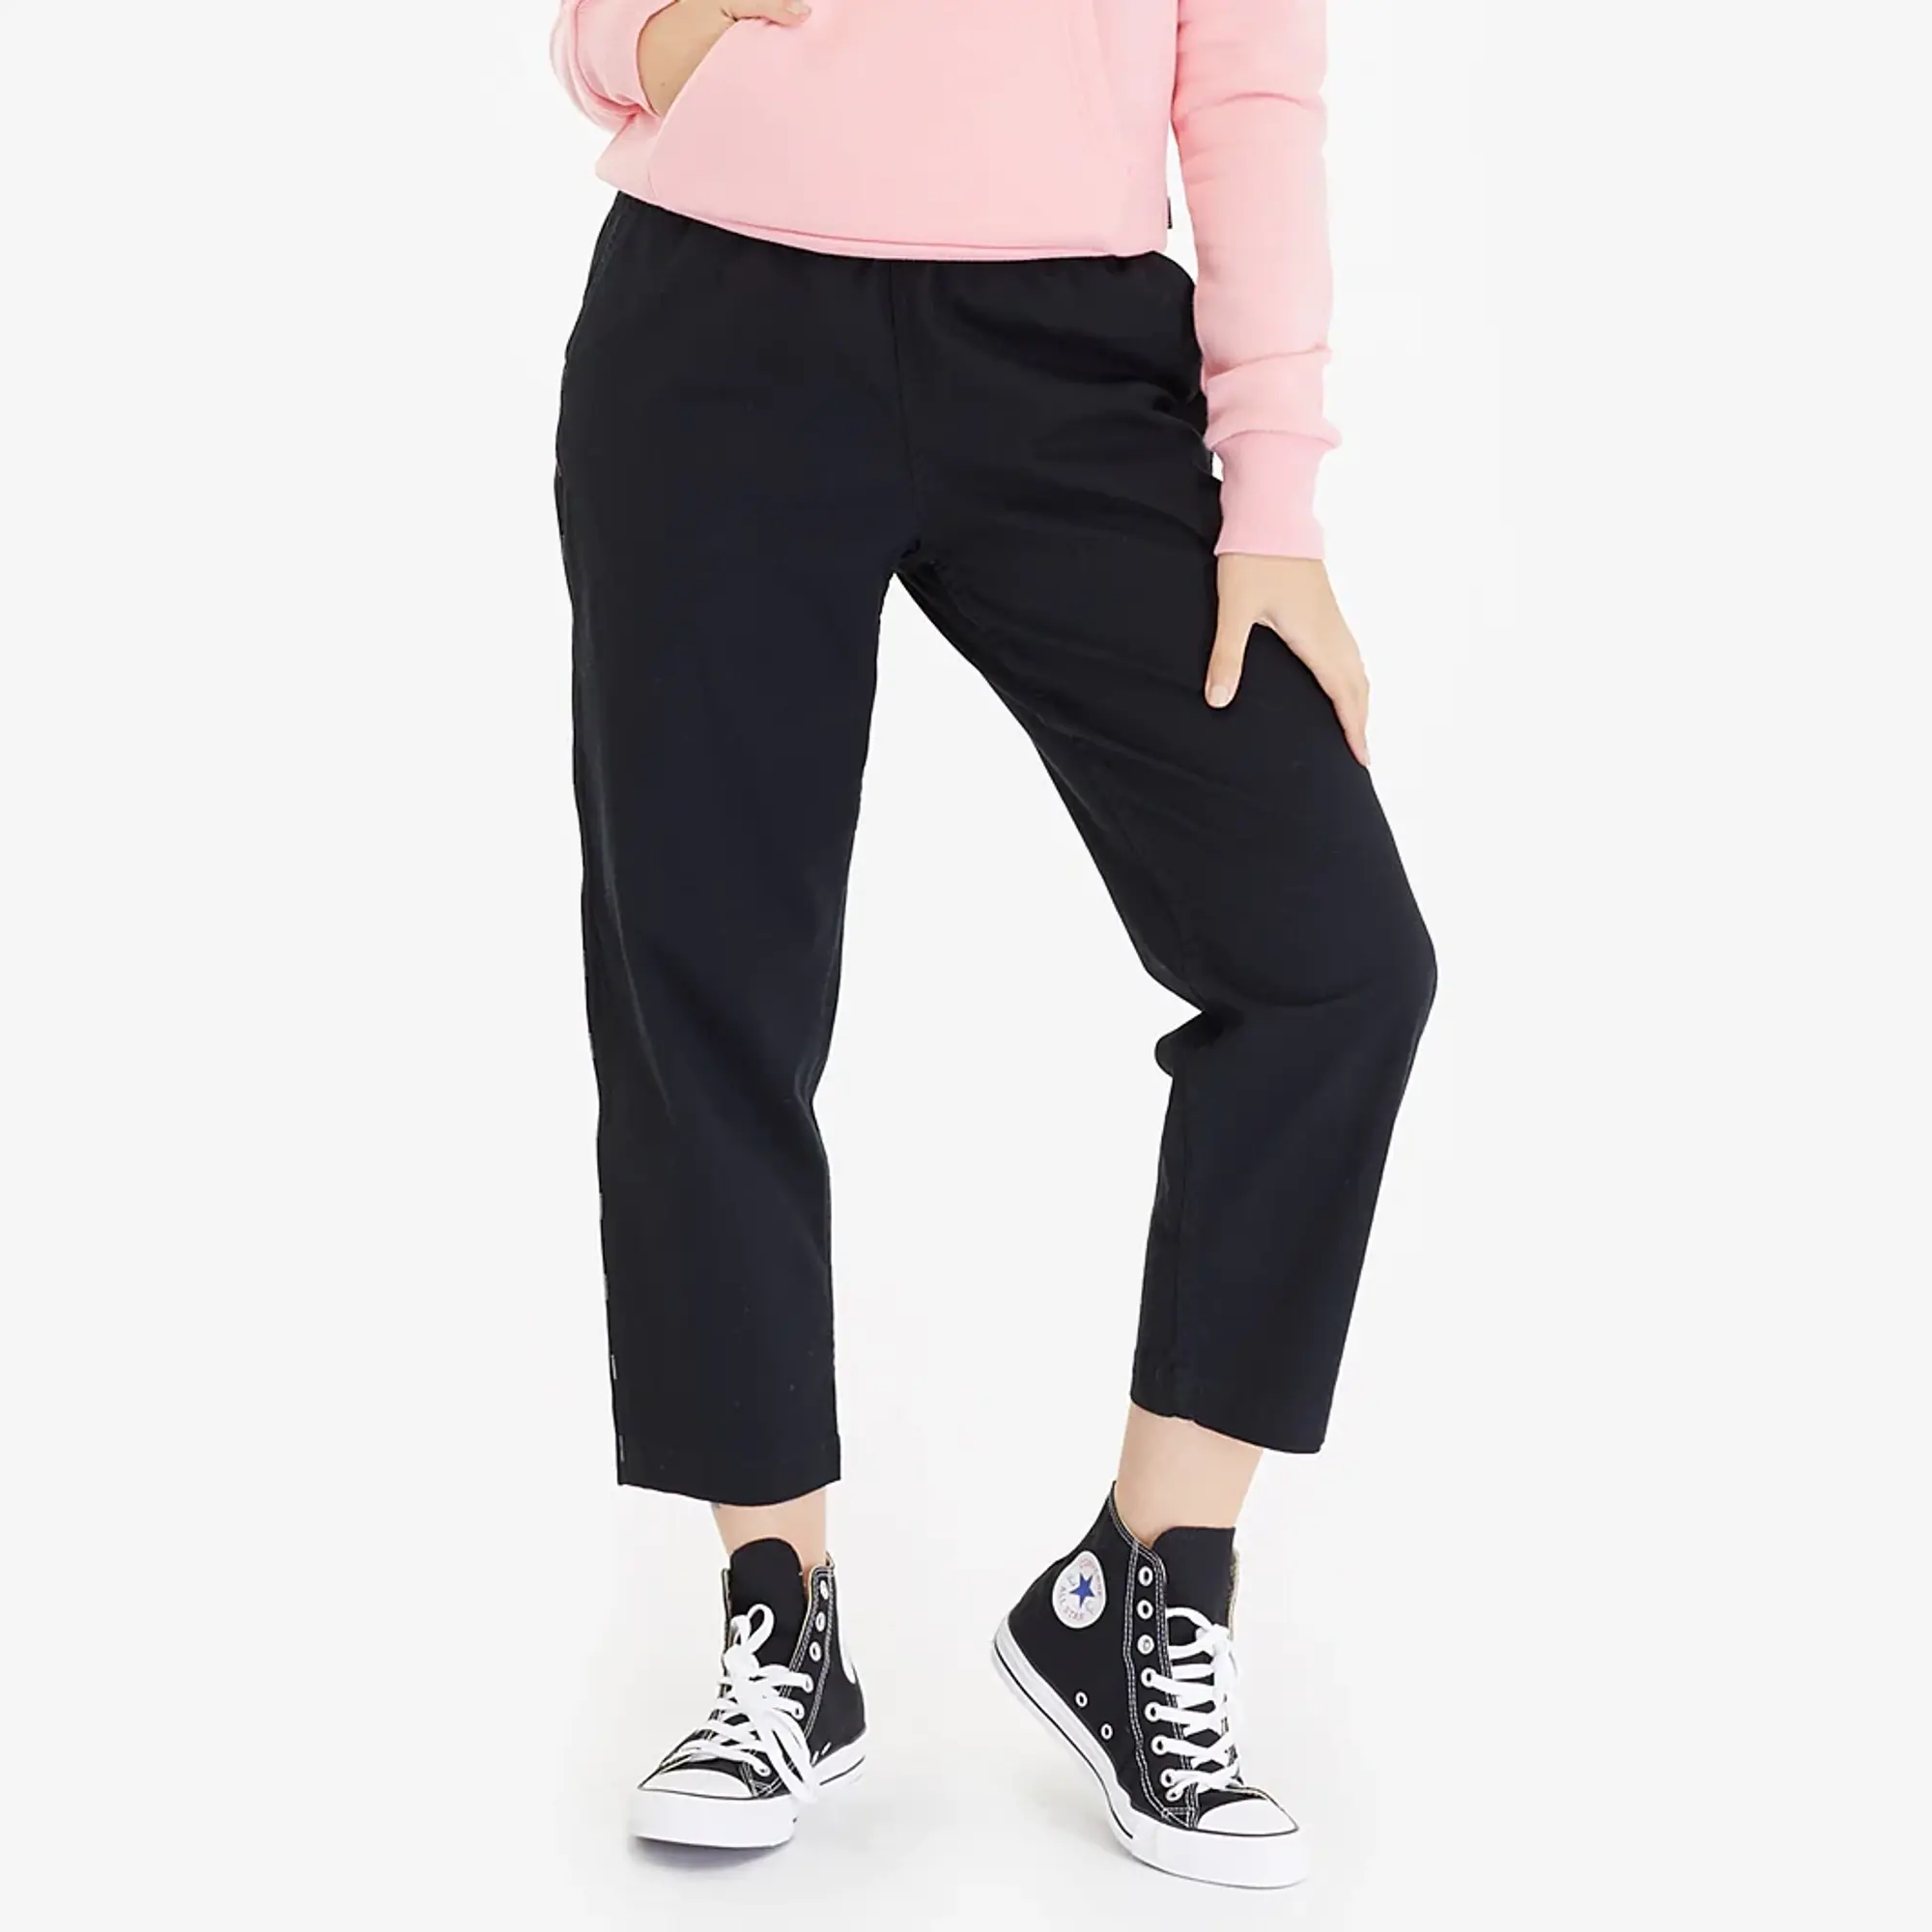 Converse Womens Piping Pull On Pant